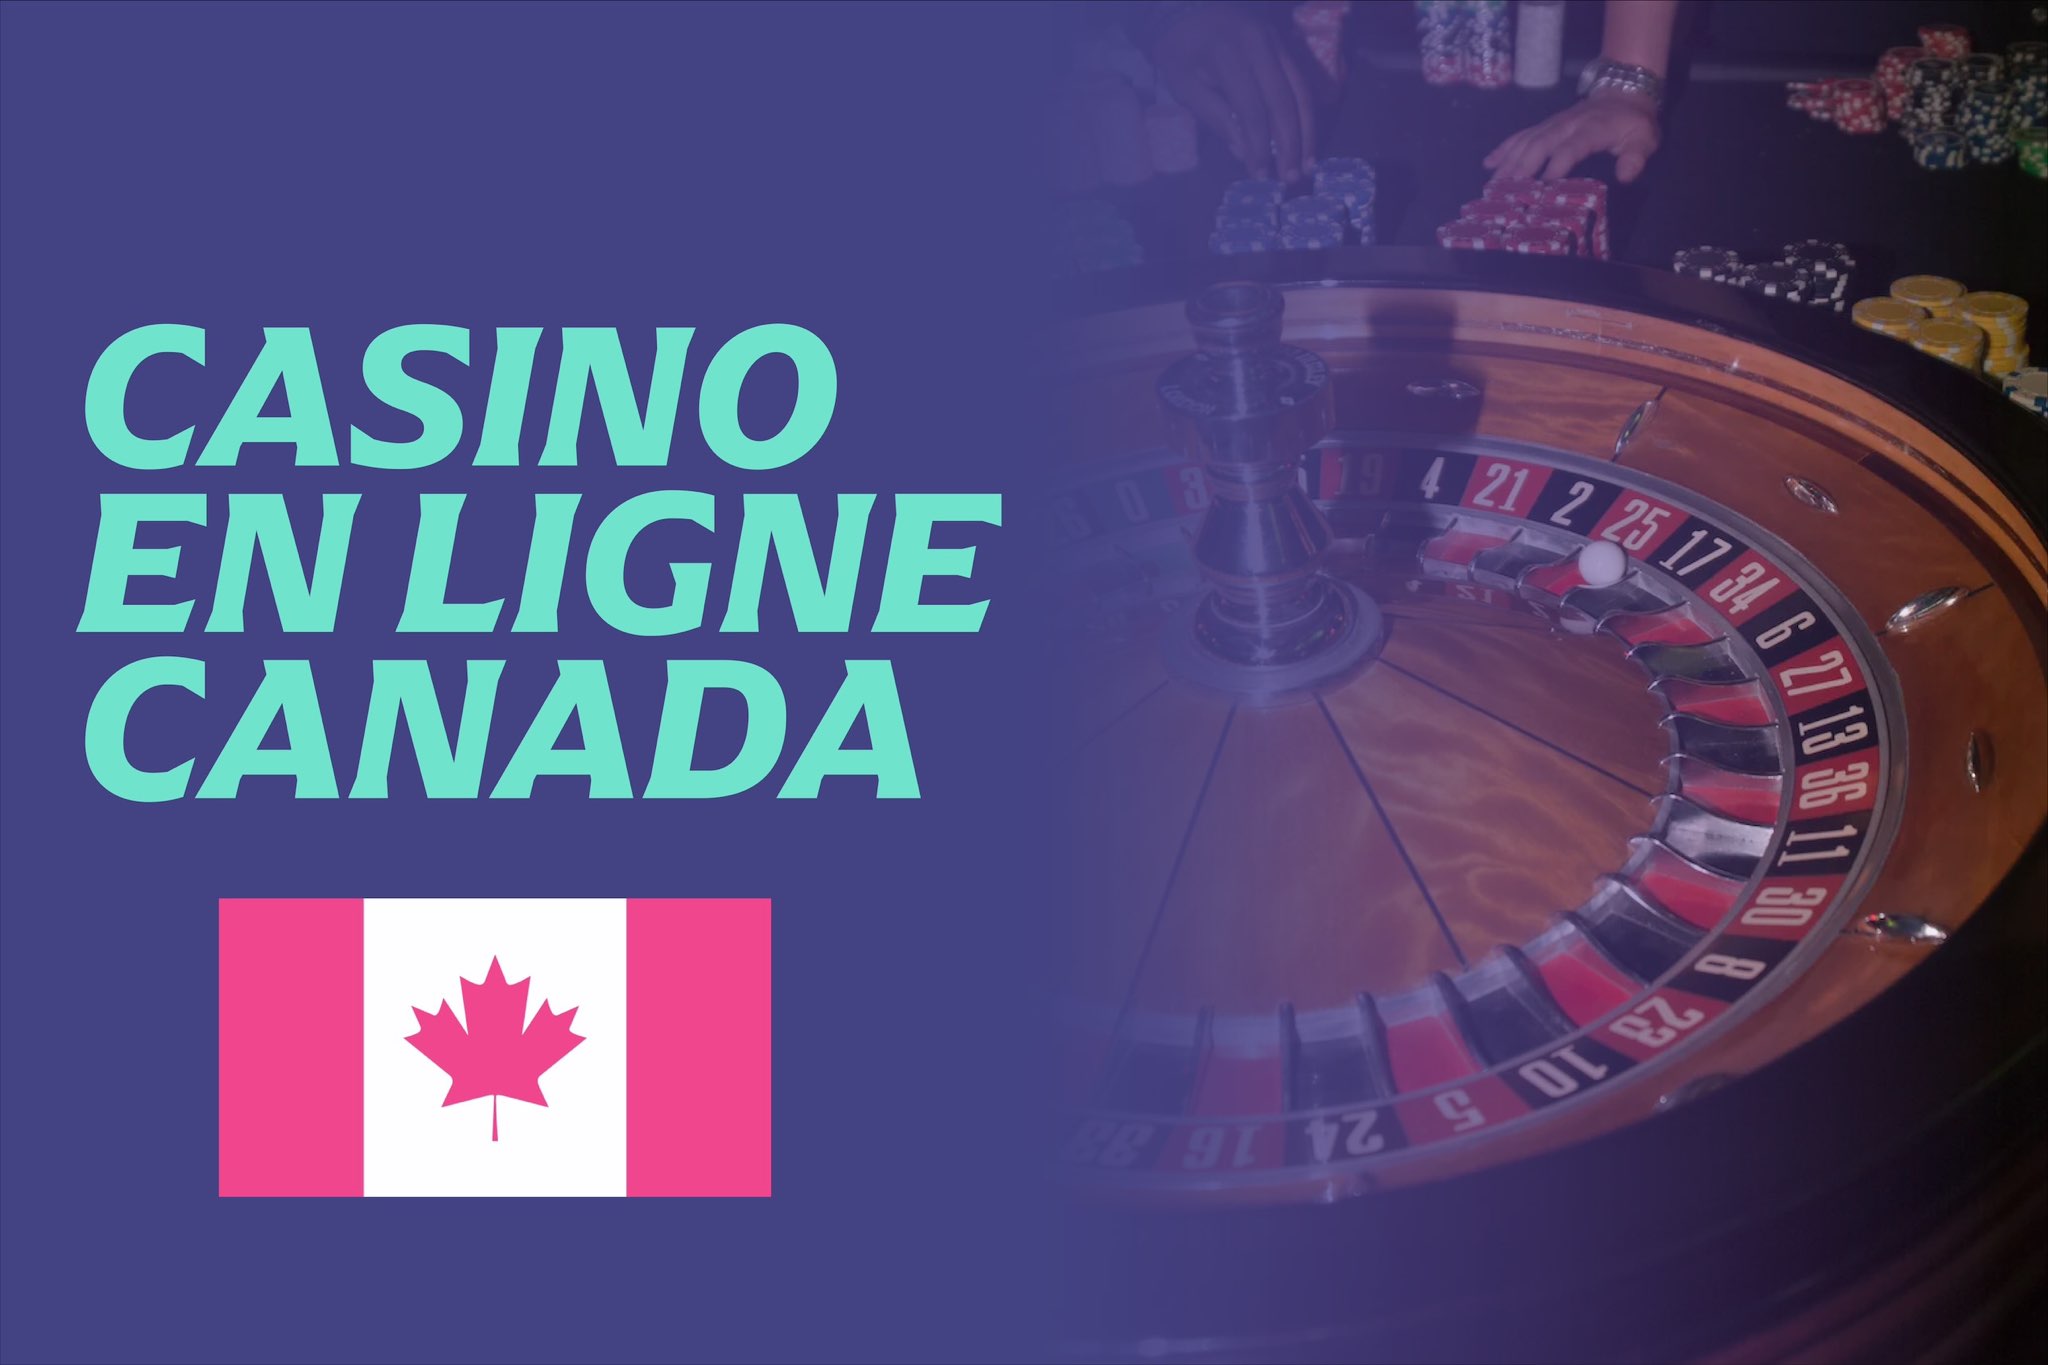 When casino en ligne canada Grow Too Quickly, This Is What Happens